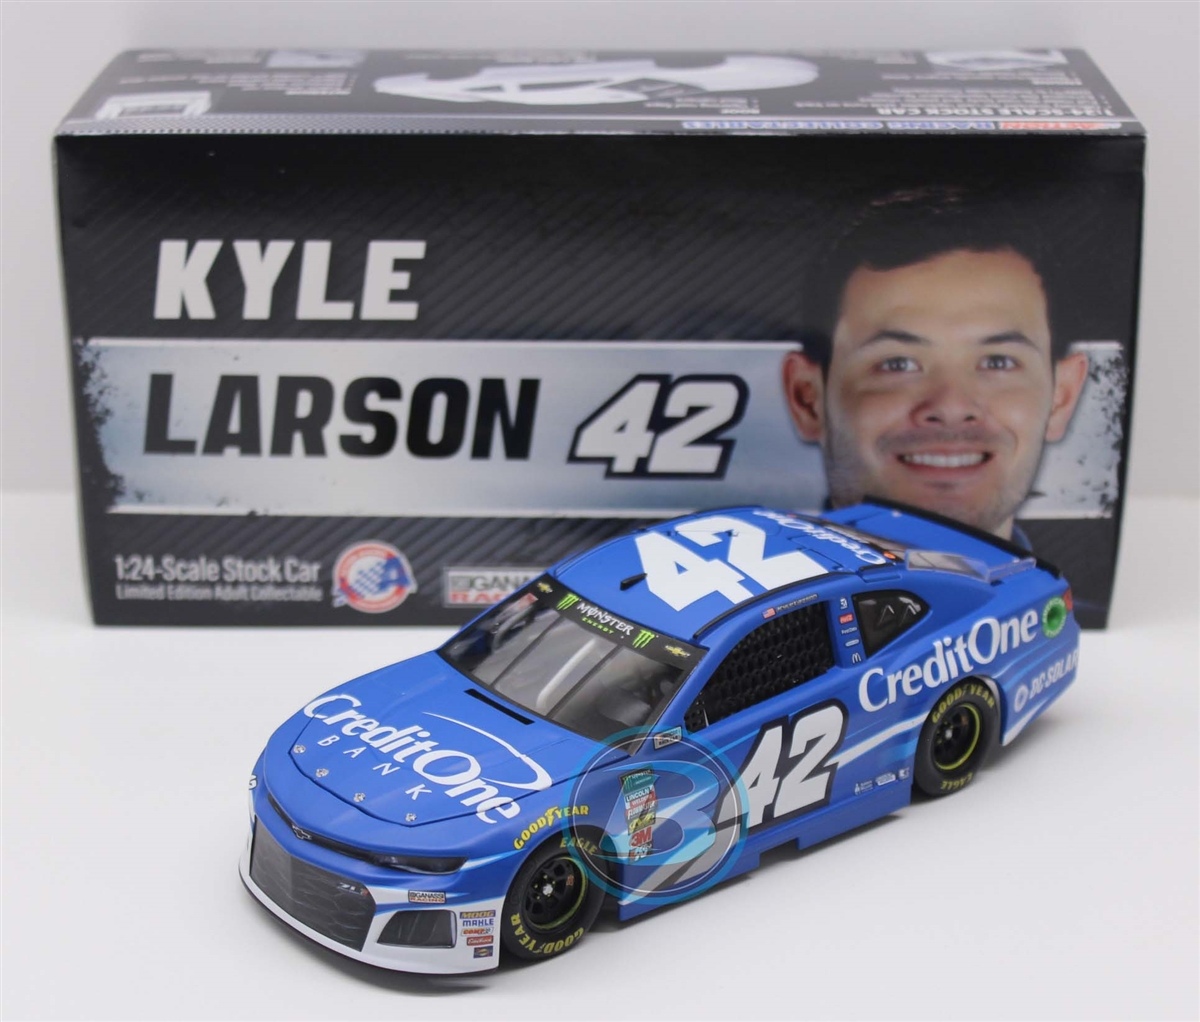 KYLE LARSON #42 2019 CREDIT ONE BANK ELITE 1/24 SCALE NEW IN STOCK FREE SHIPPING 